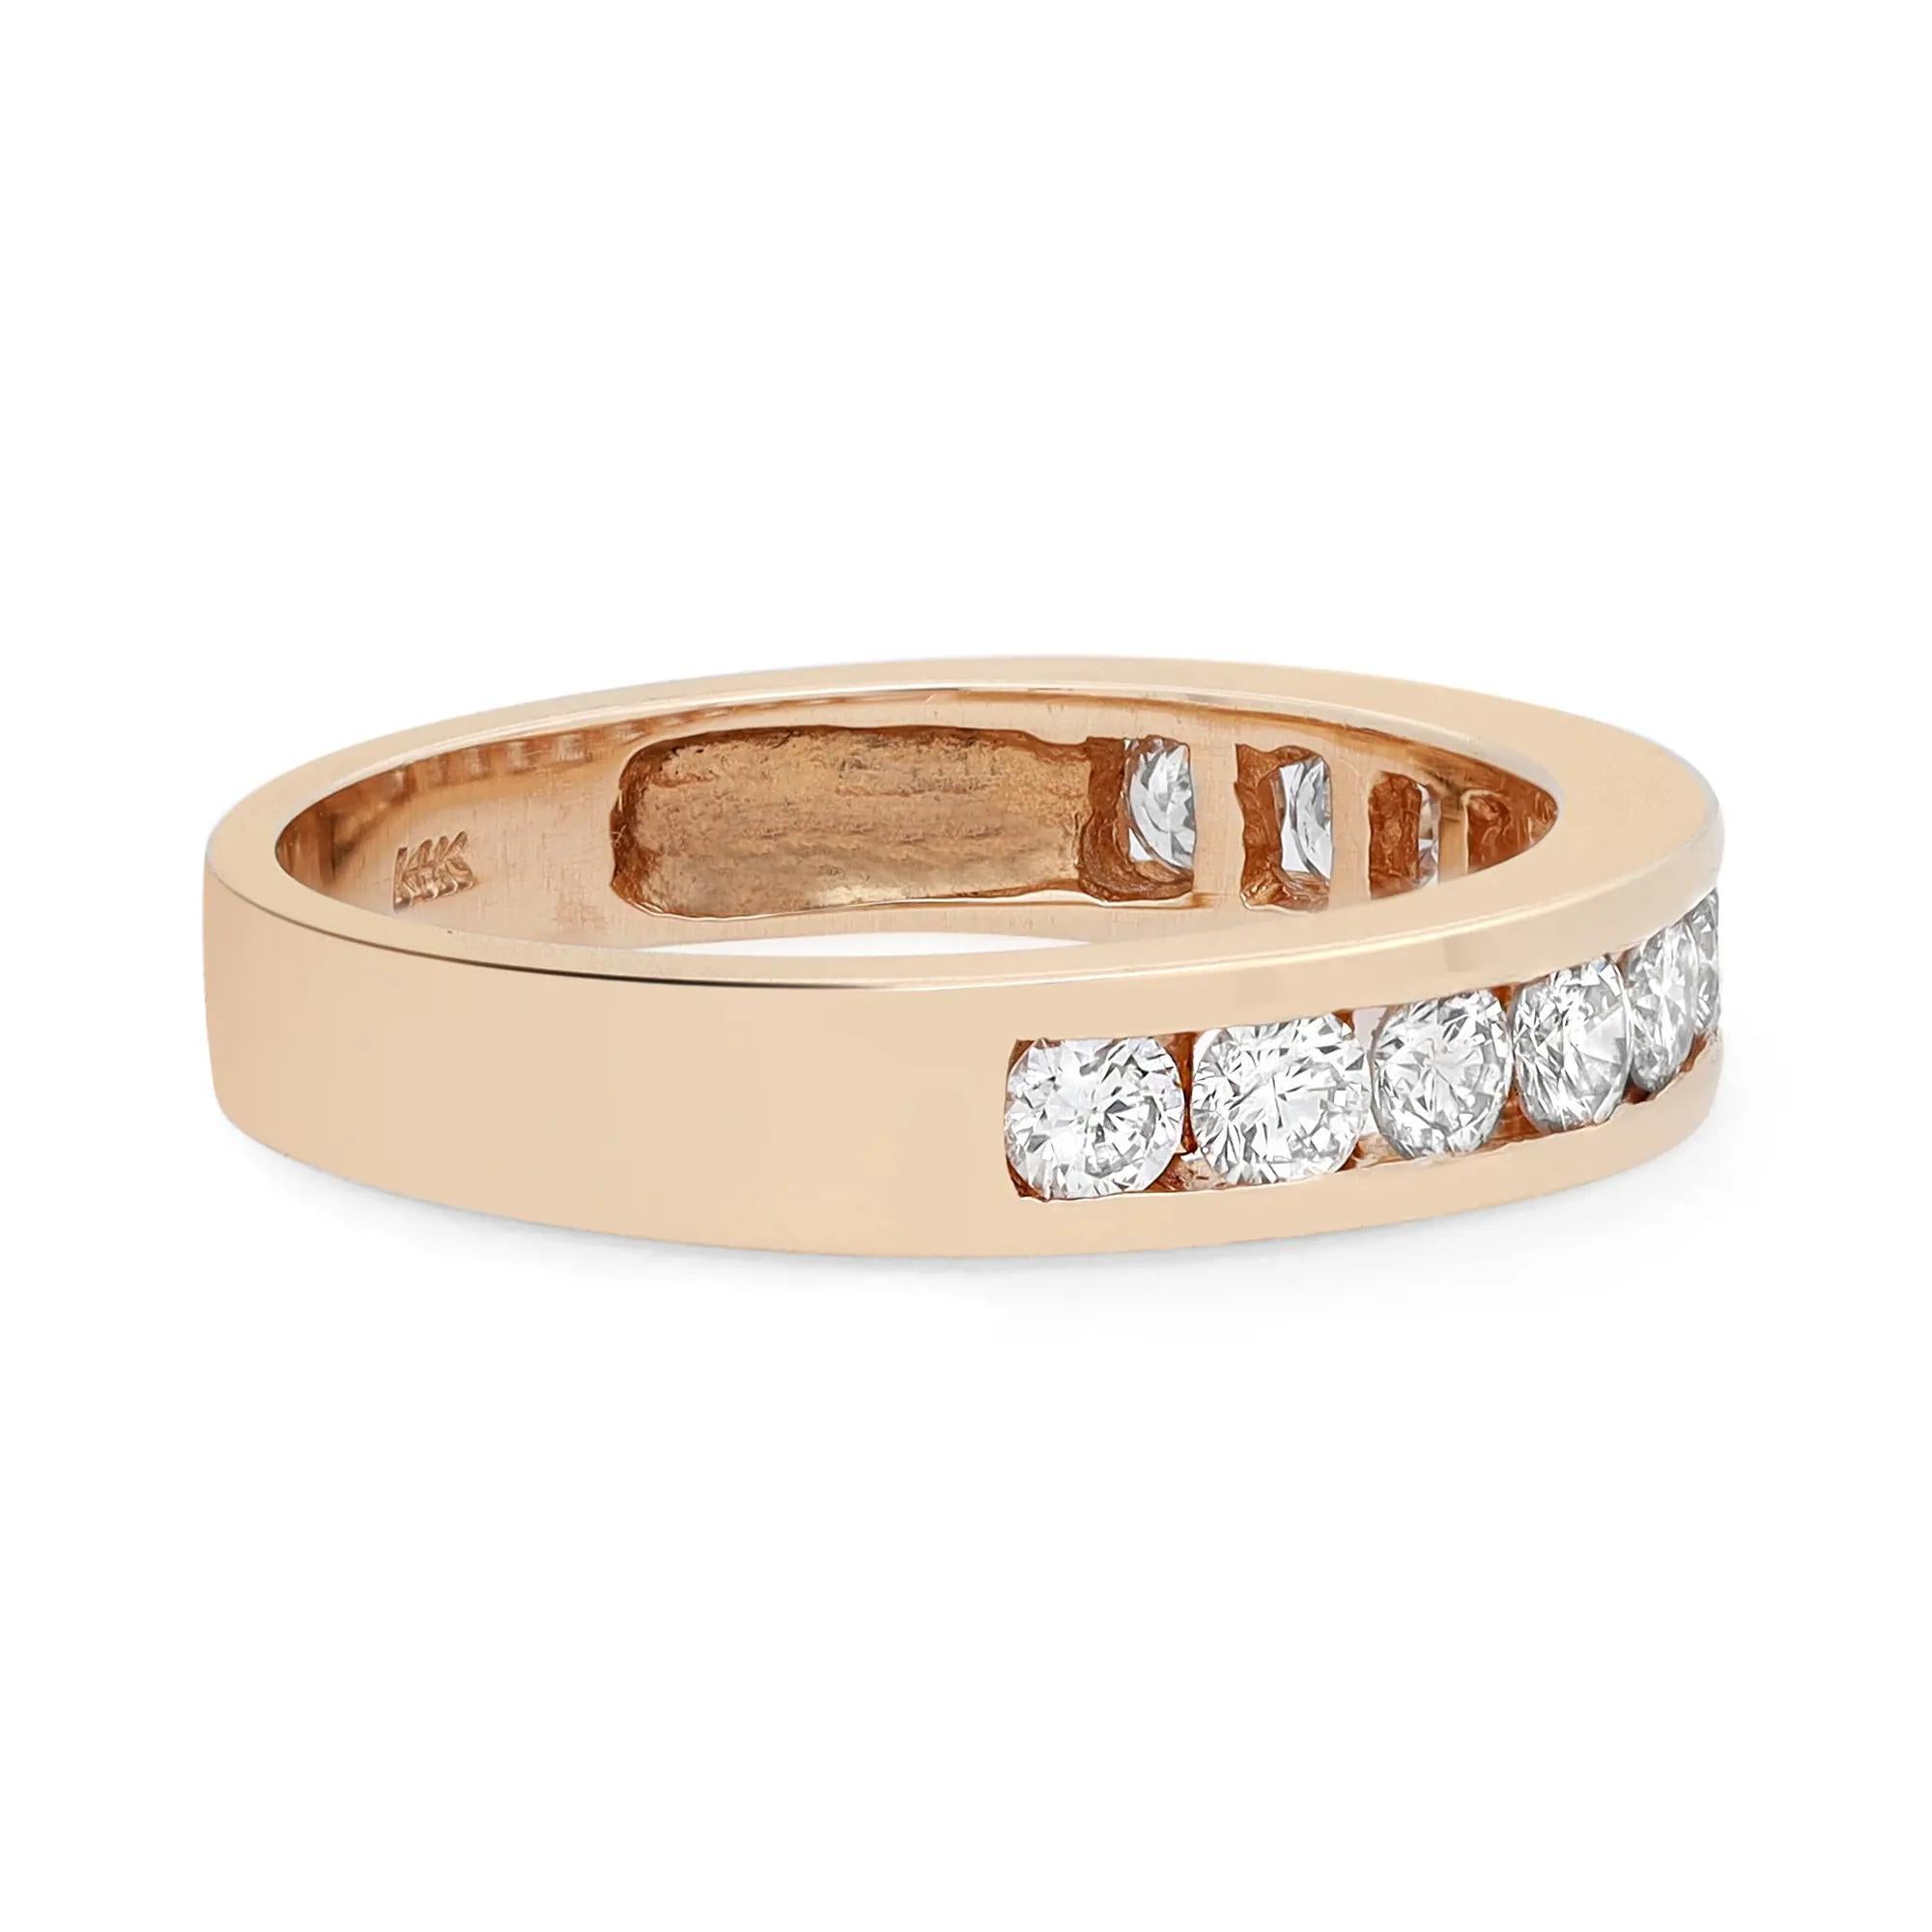 This classic women's band ring features 11 round brilliant cut dazzling diamonds. All diamonds are channel set in a high polished 14K yellow gold setting. Total diamond weight: 0.75 carat. Diamond color H and VS1 clarity. Band width: 4 mm. Ring Size